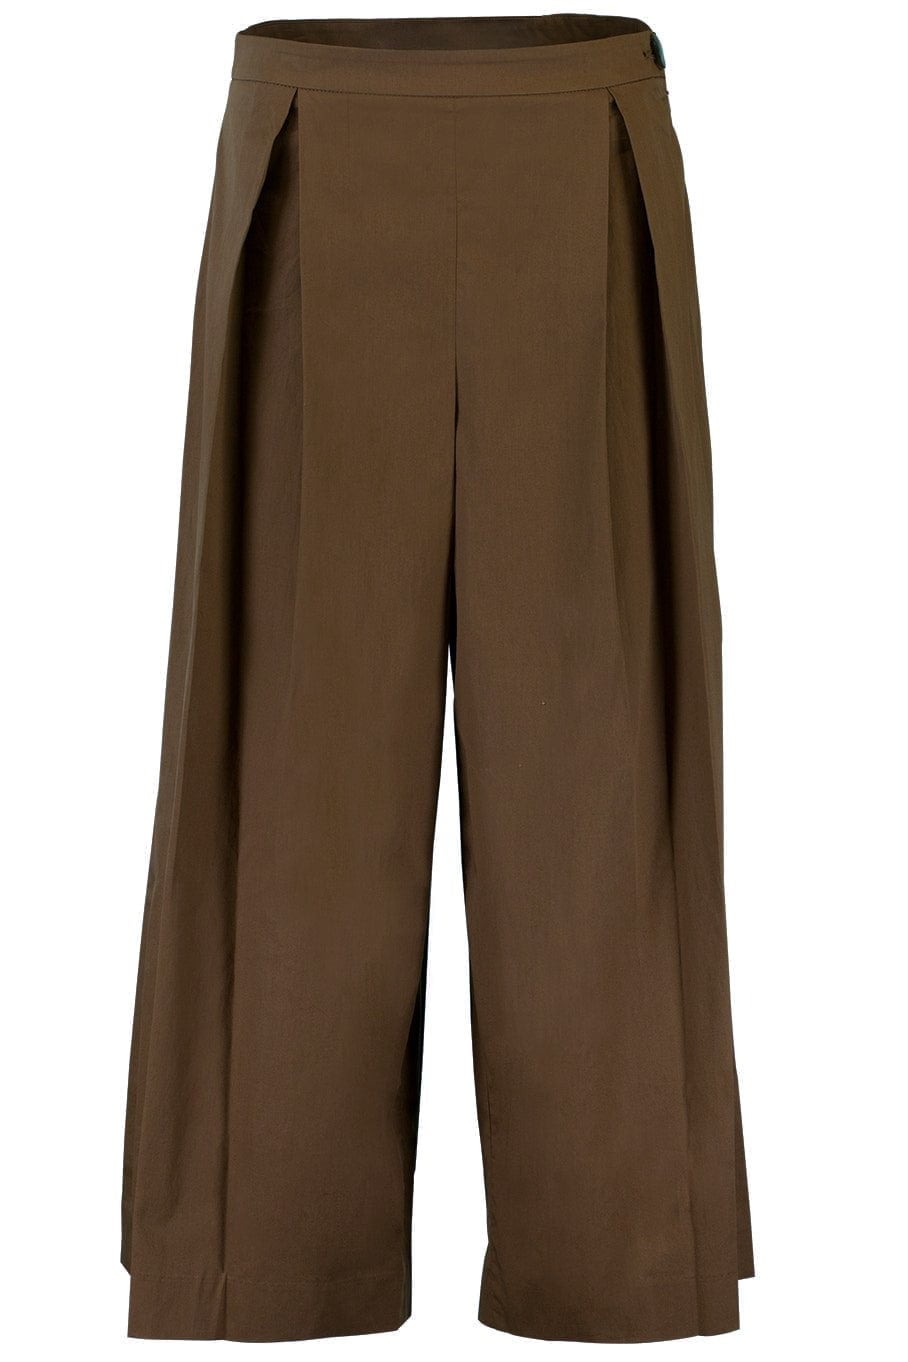 VINCE-Pleated Culotte-